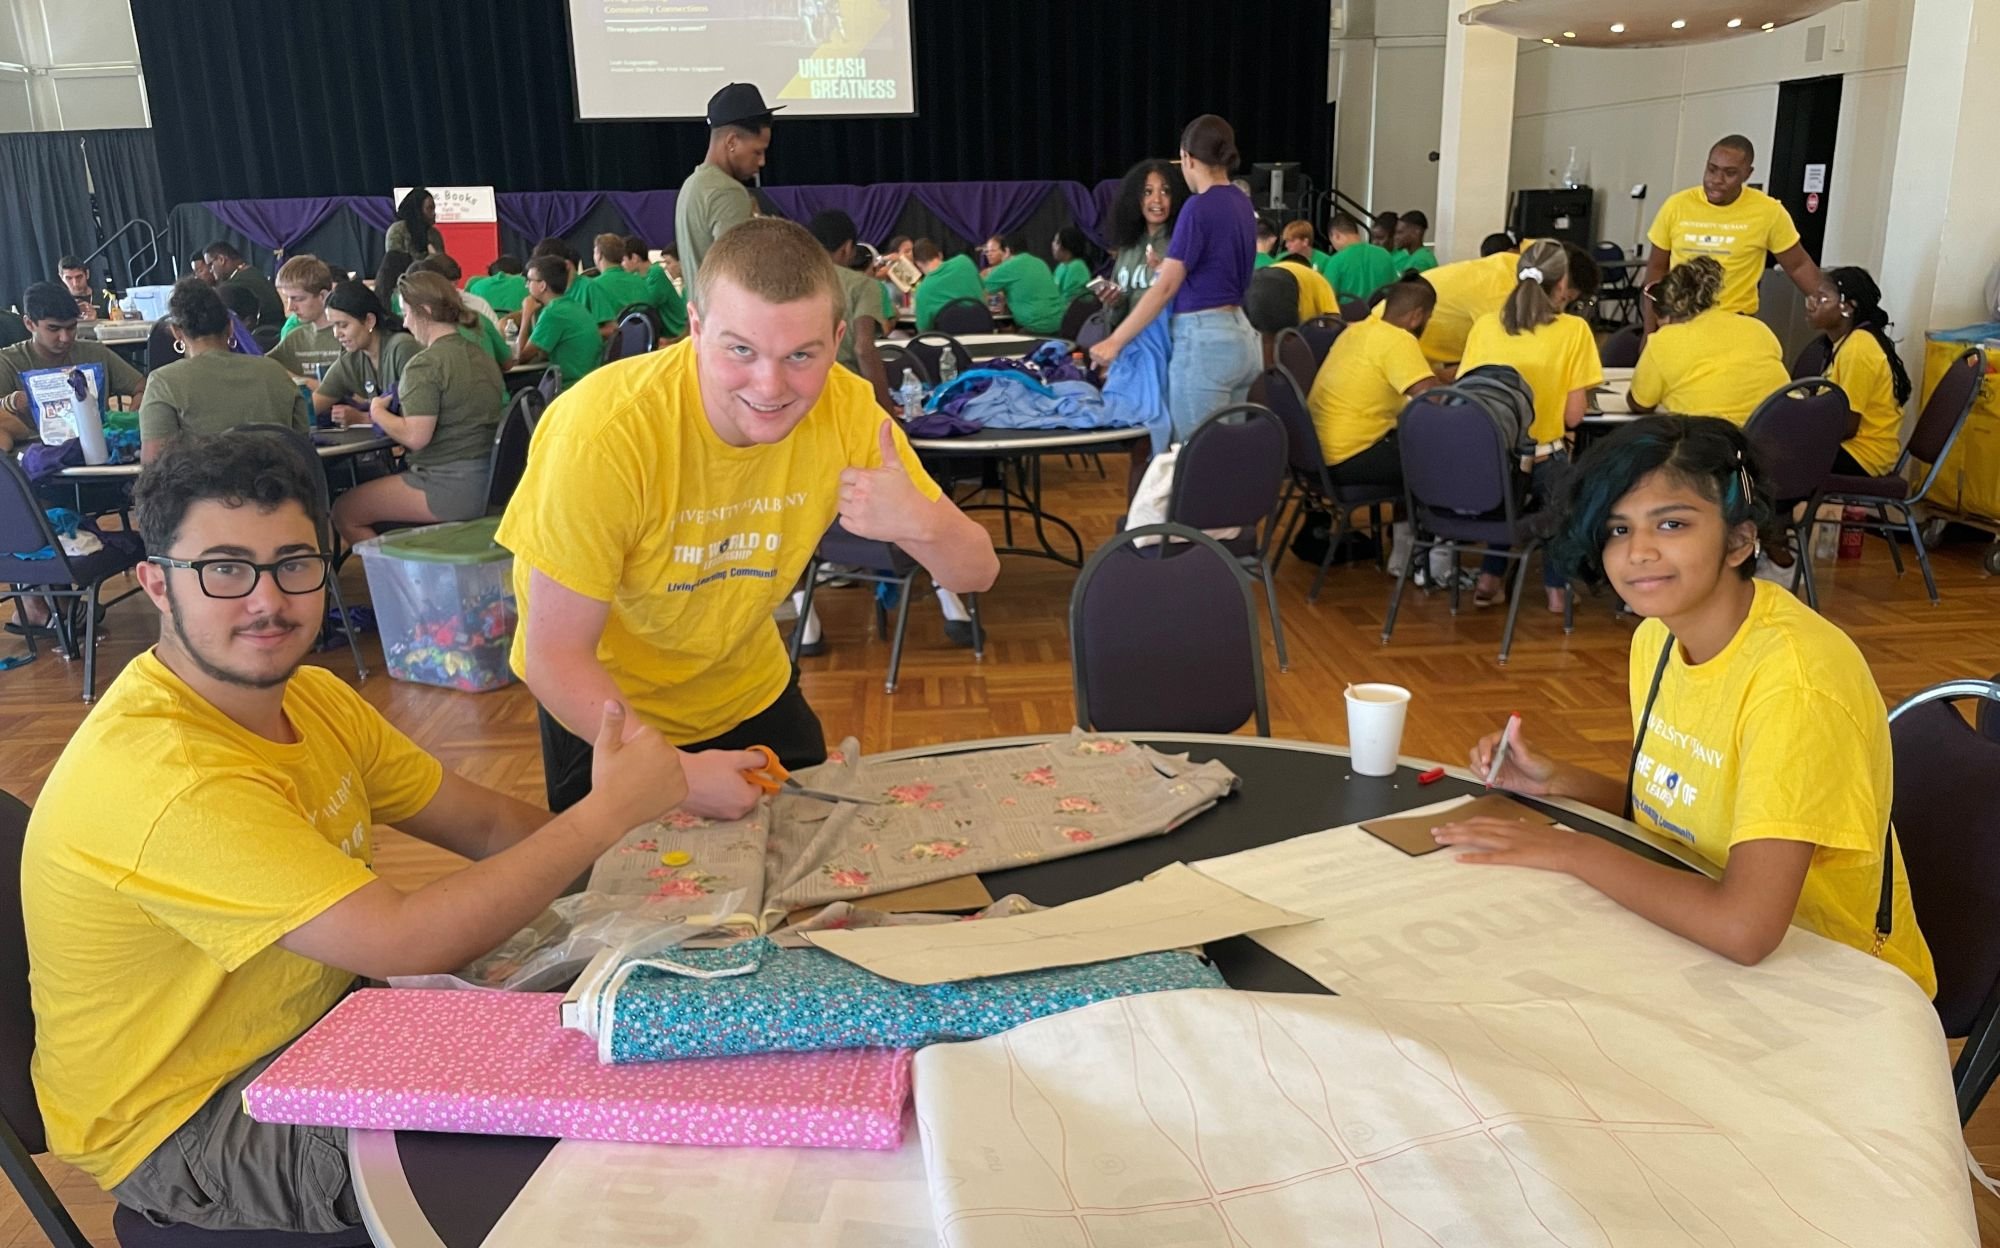 Students in matching yellow T-shirts smile and pose for a photograph. Two of them are seated at a craft table topped with large pieces of fabric.